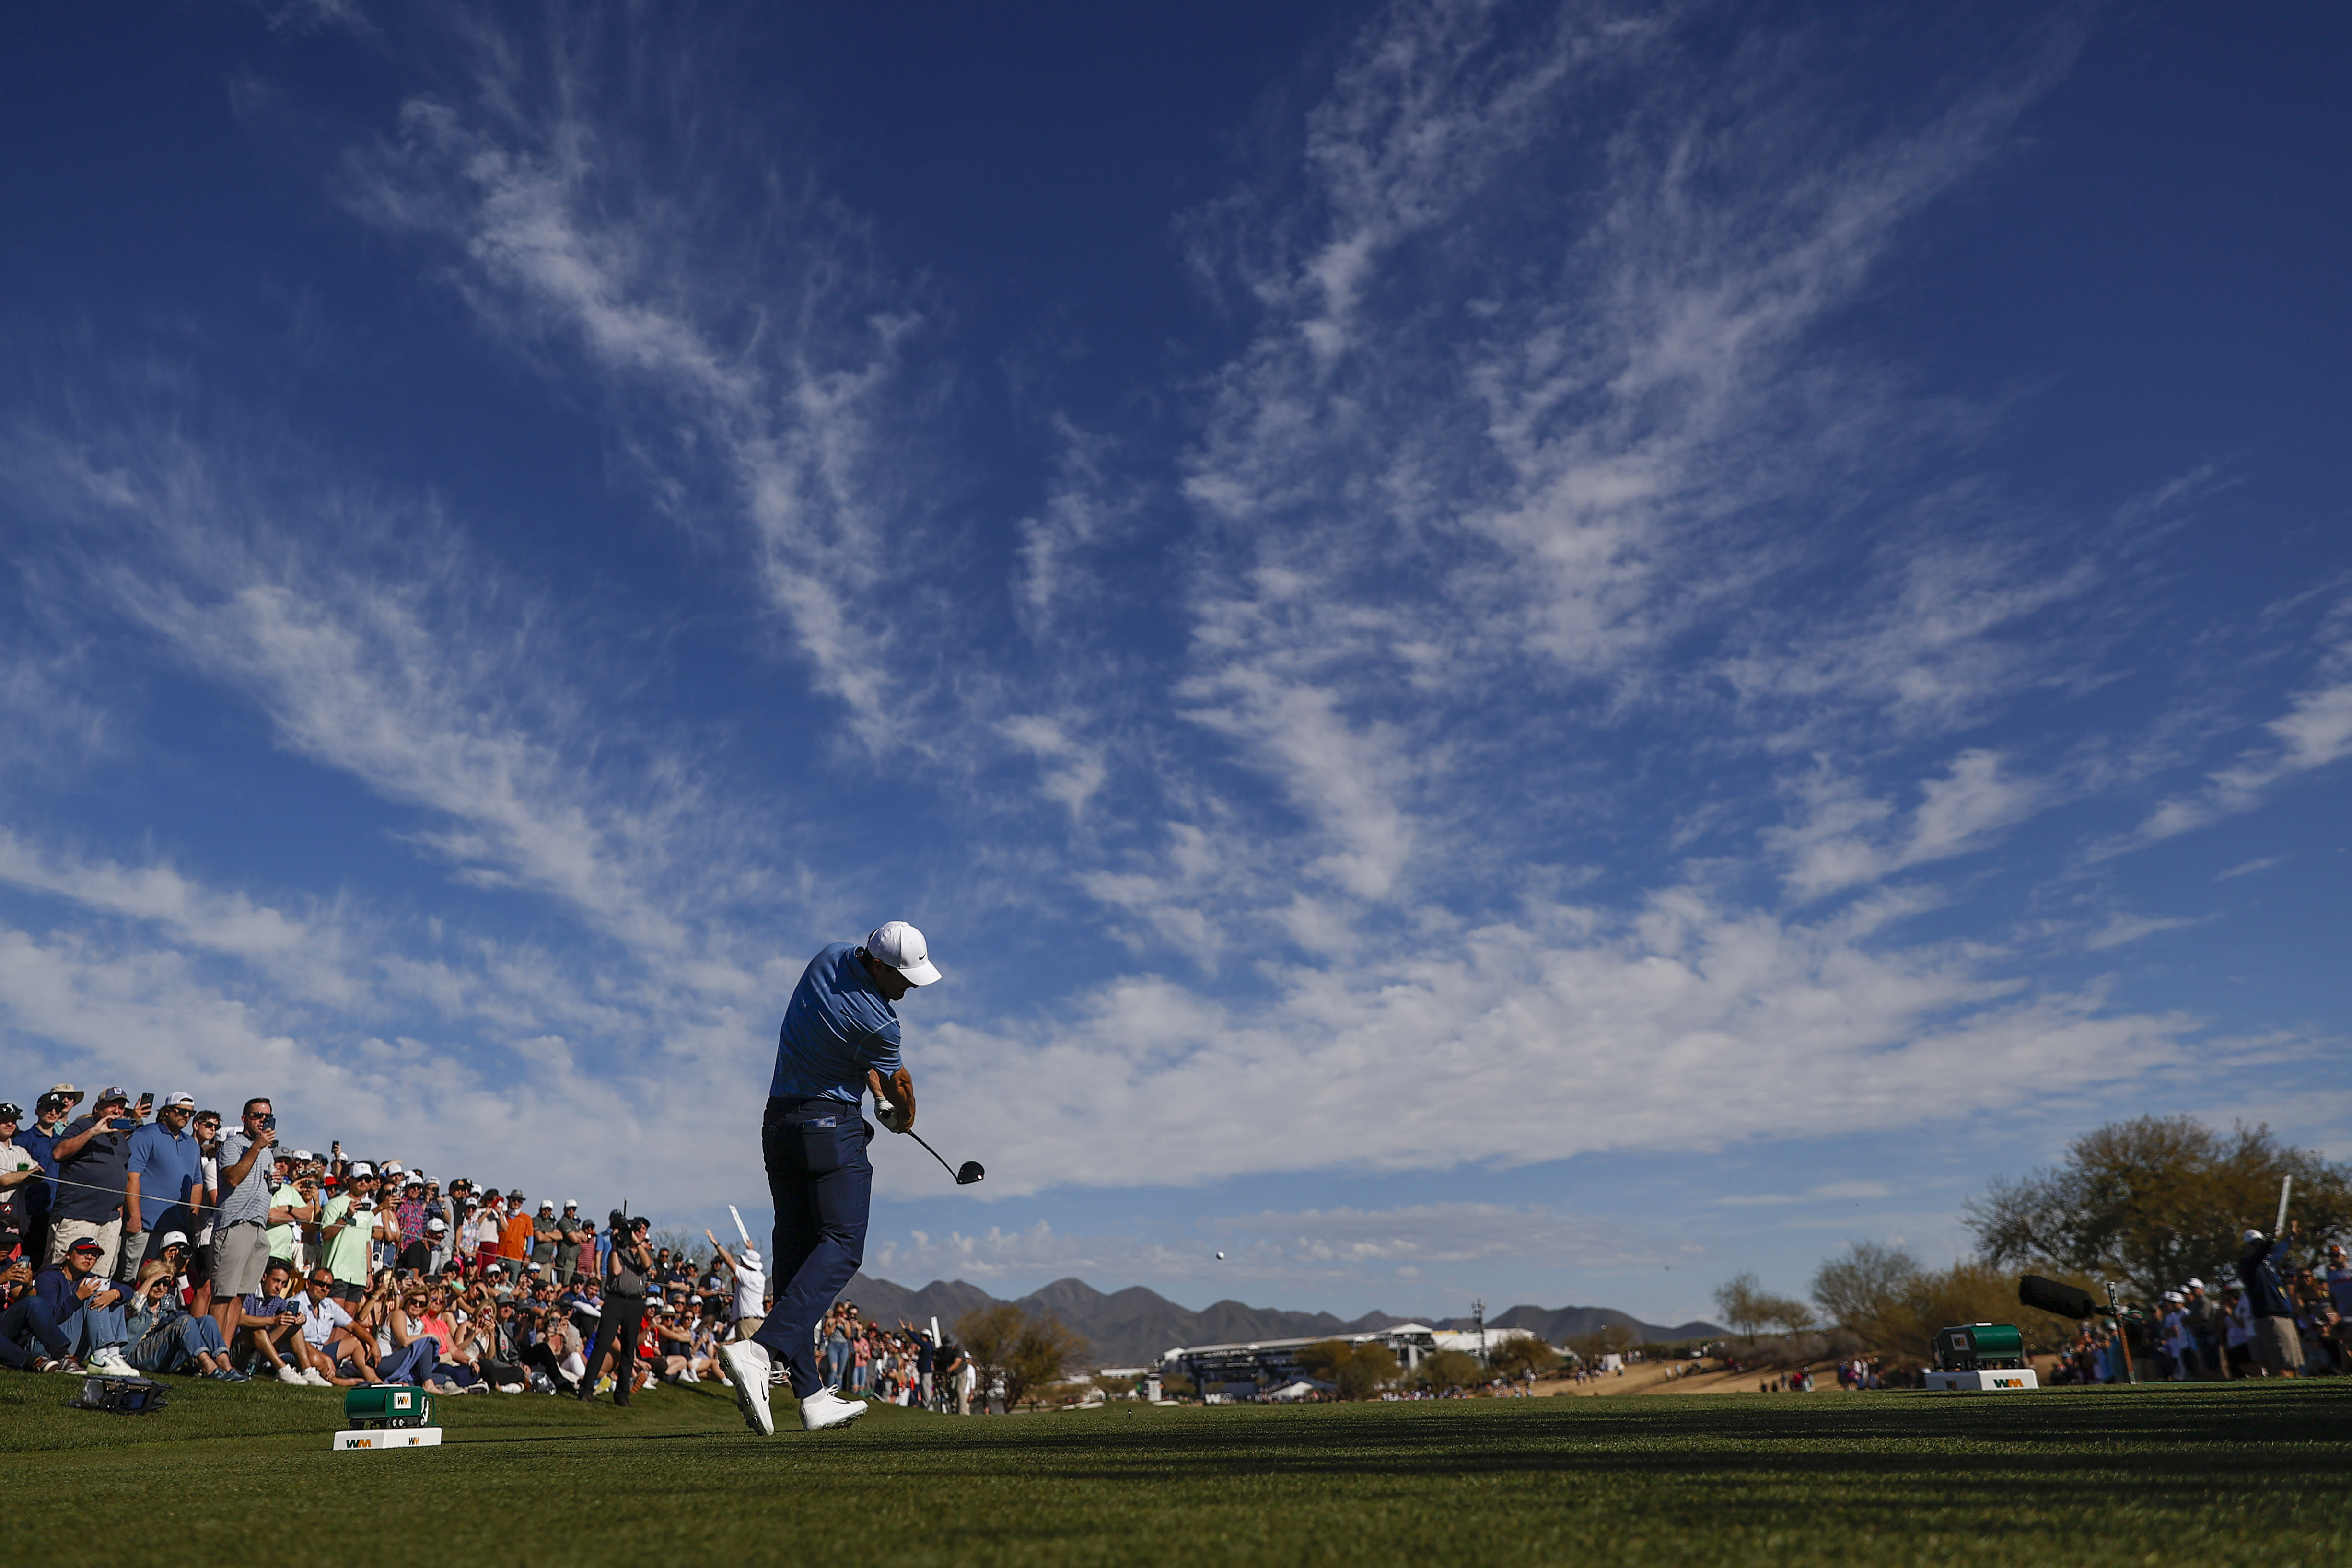 Scottie Scheffler plays his shot from the 15th tee during the final round of the 2023 WM Phoenix Open at TPC Scottsdale. (Photo by Steph Chambers/Getty Images)